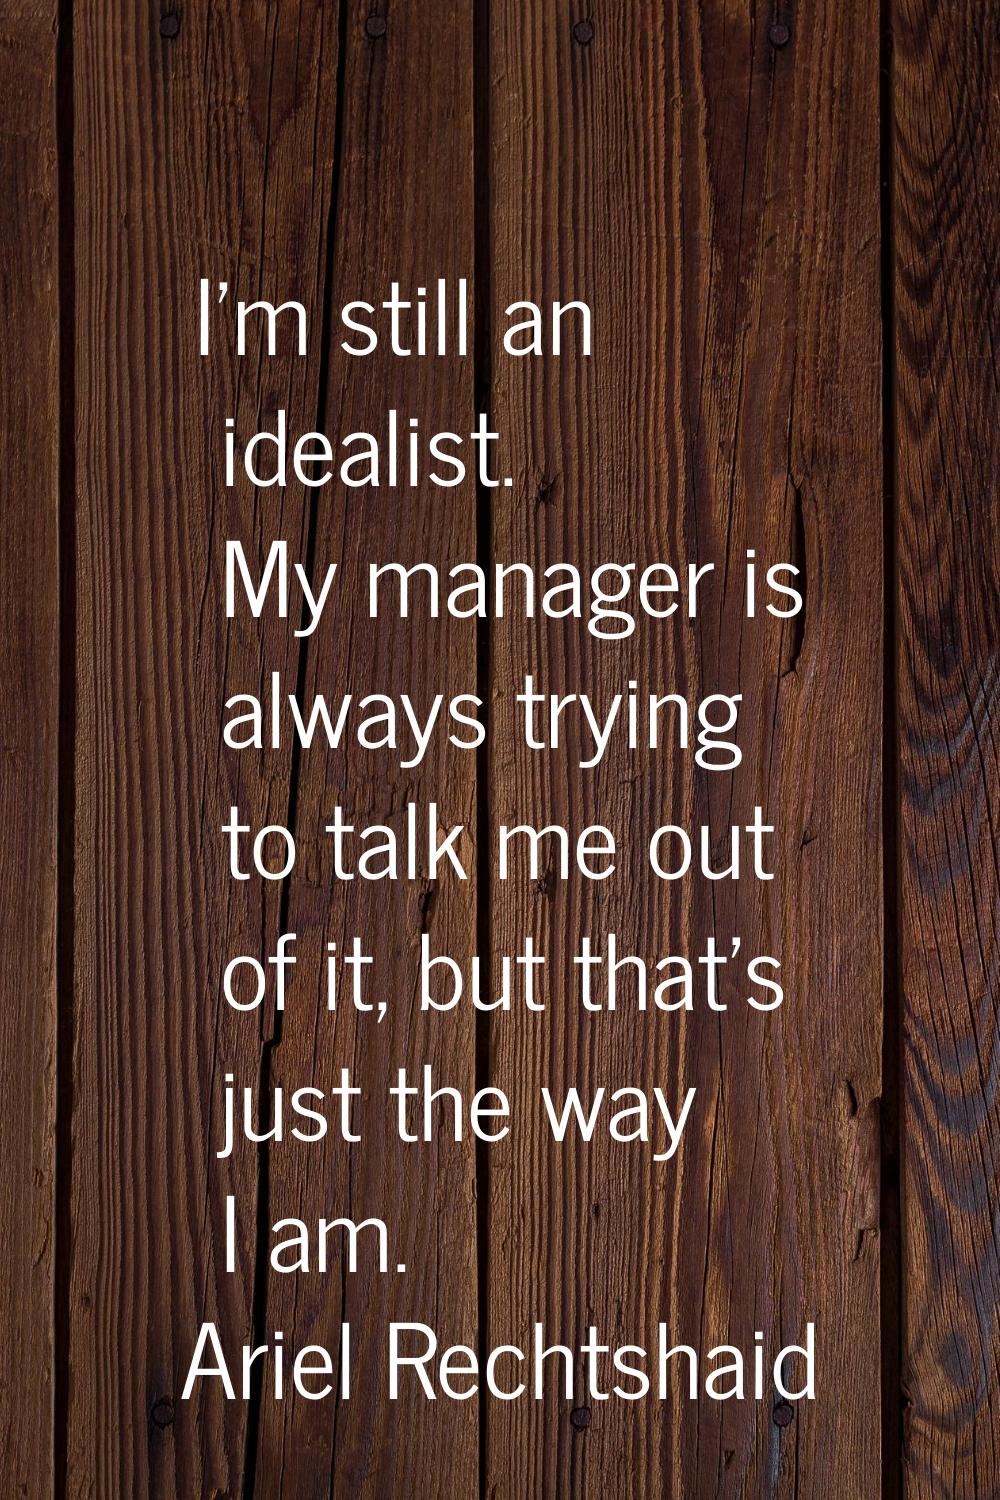 I'm still an idealist. My manager is always trying to talk me out of it, but that's just the way I 